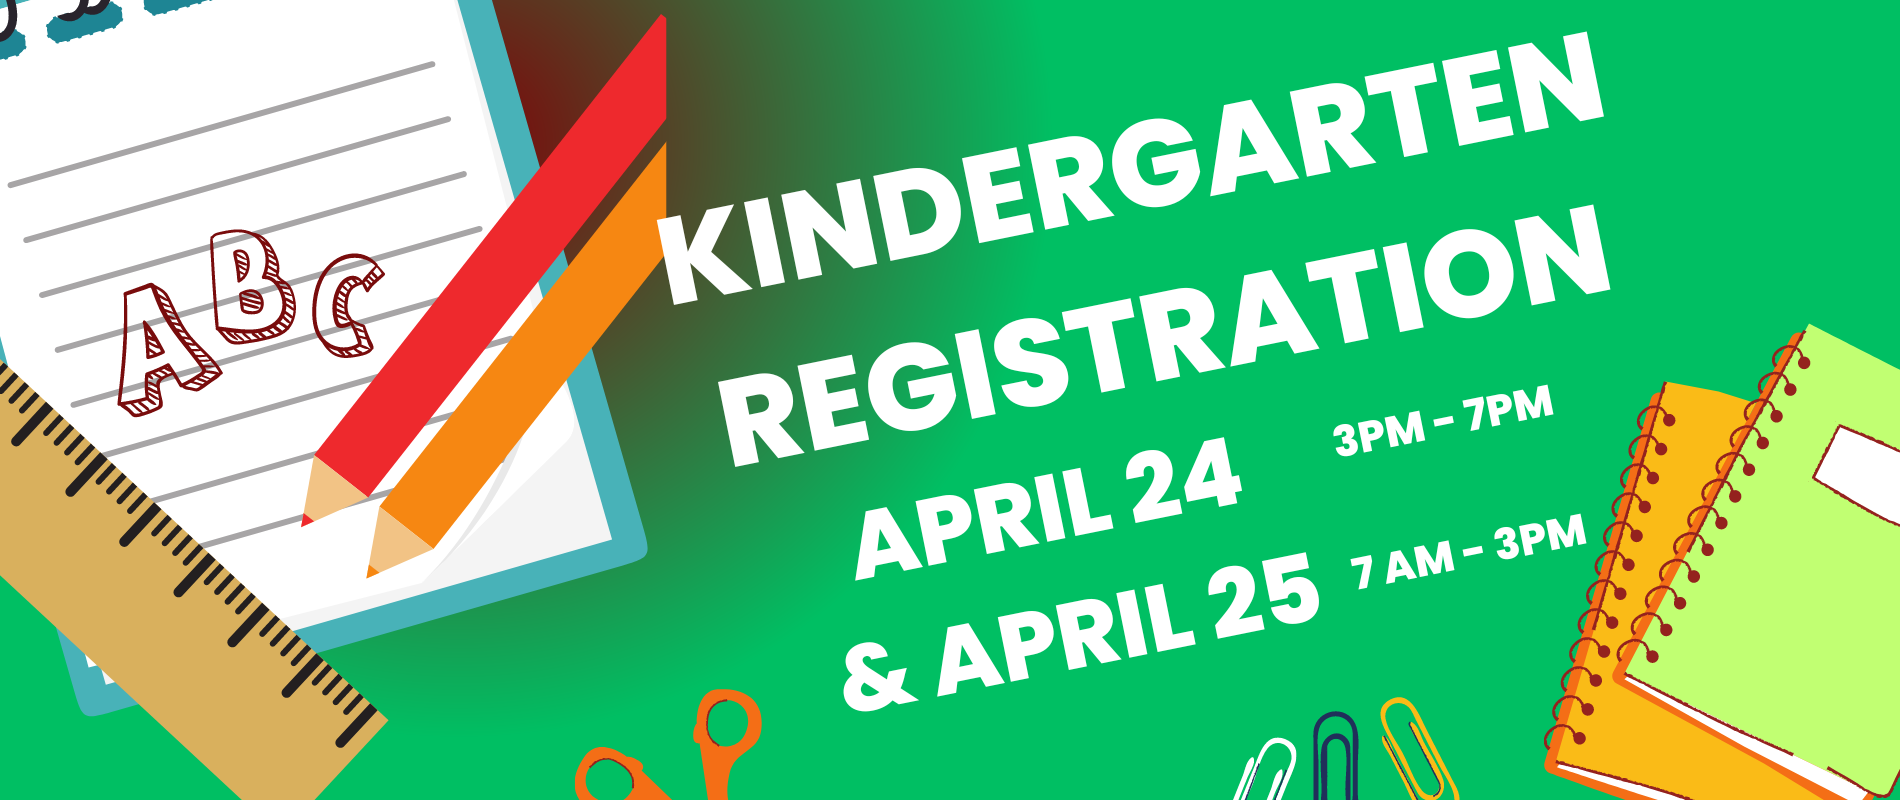 Haviland Ave School.  Kindergarten Registration.  See the Website for further information. April 24th 3pm to 7pm April 25th 7 am to 3pm